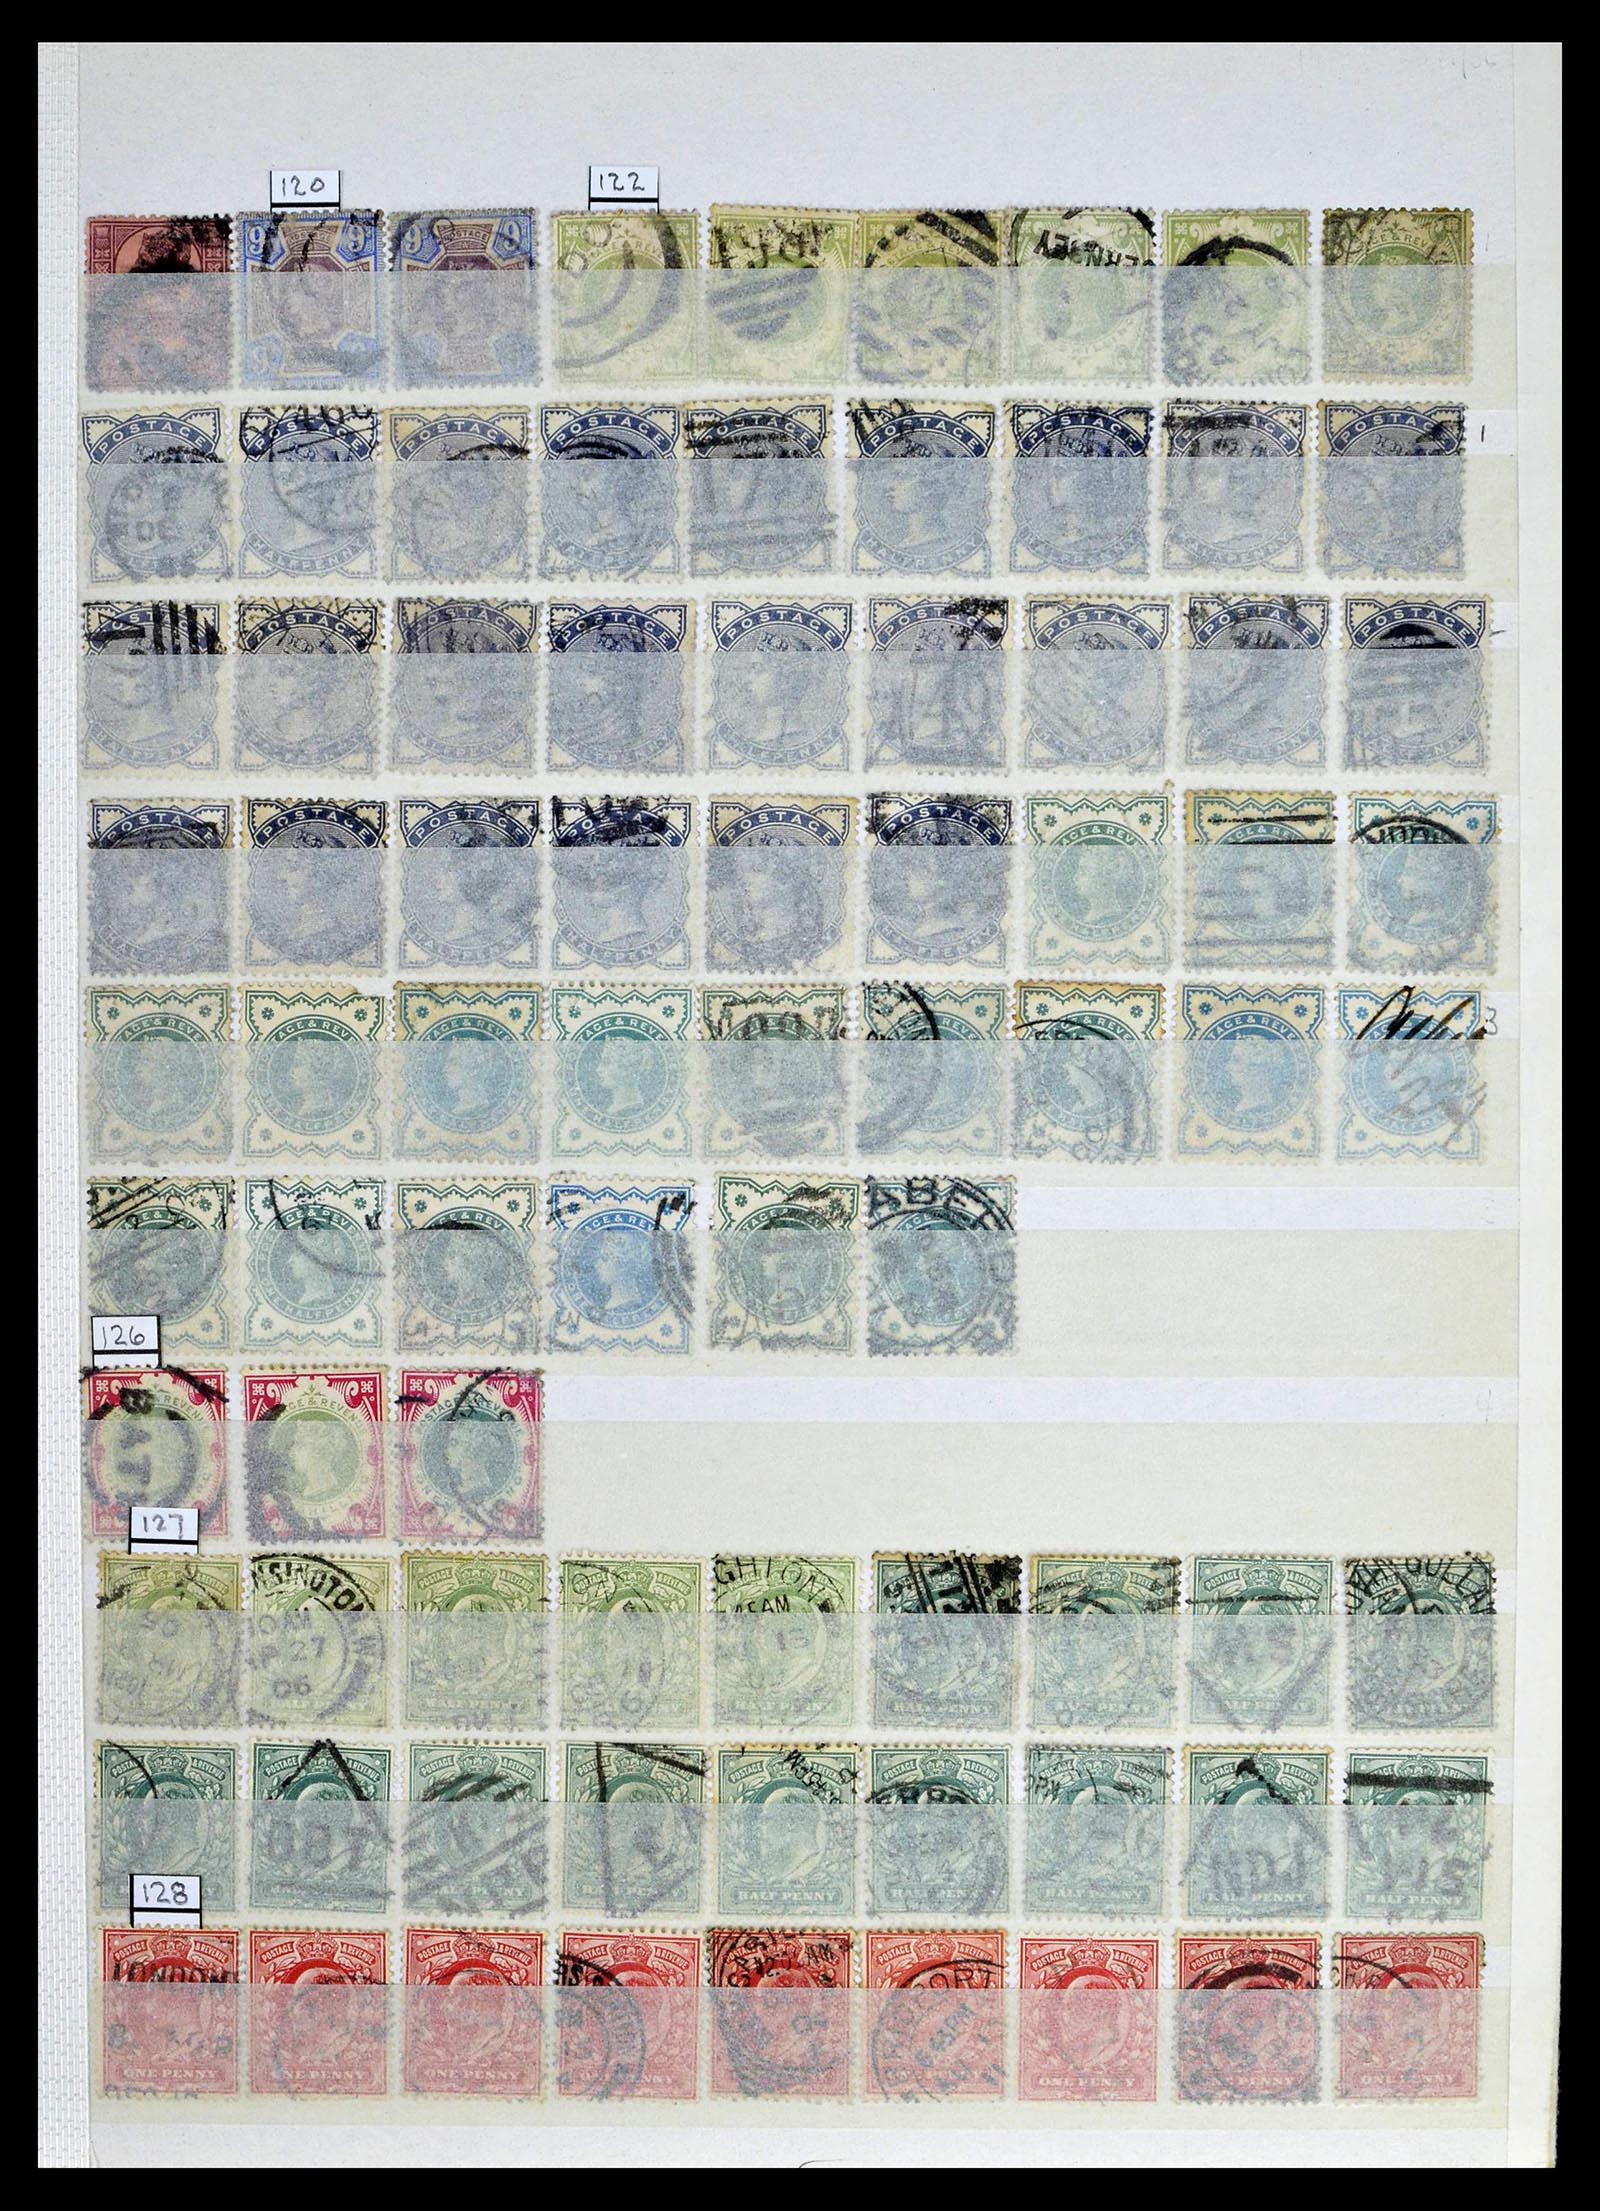 39196 0017 - Stamp collection 39196 Great Britain 1844-1955.